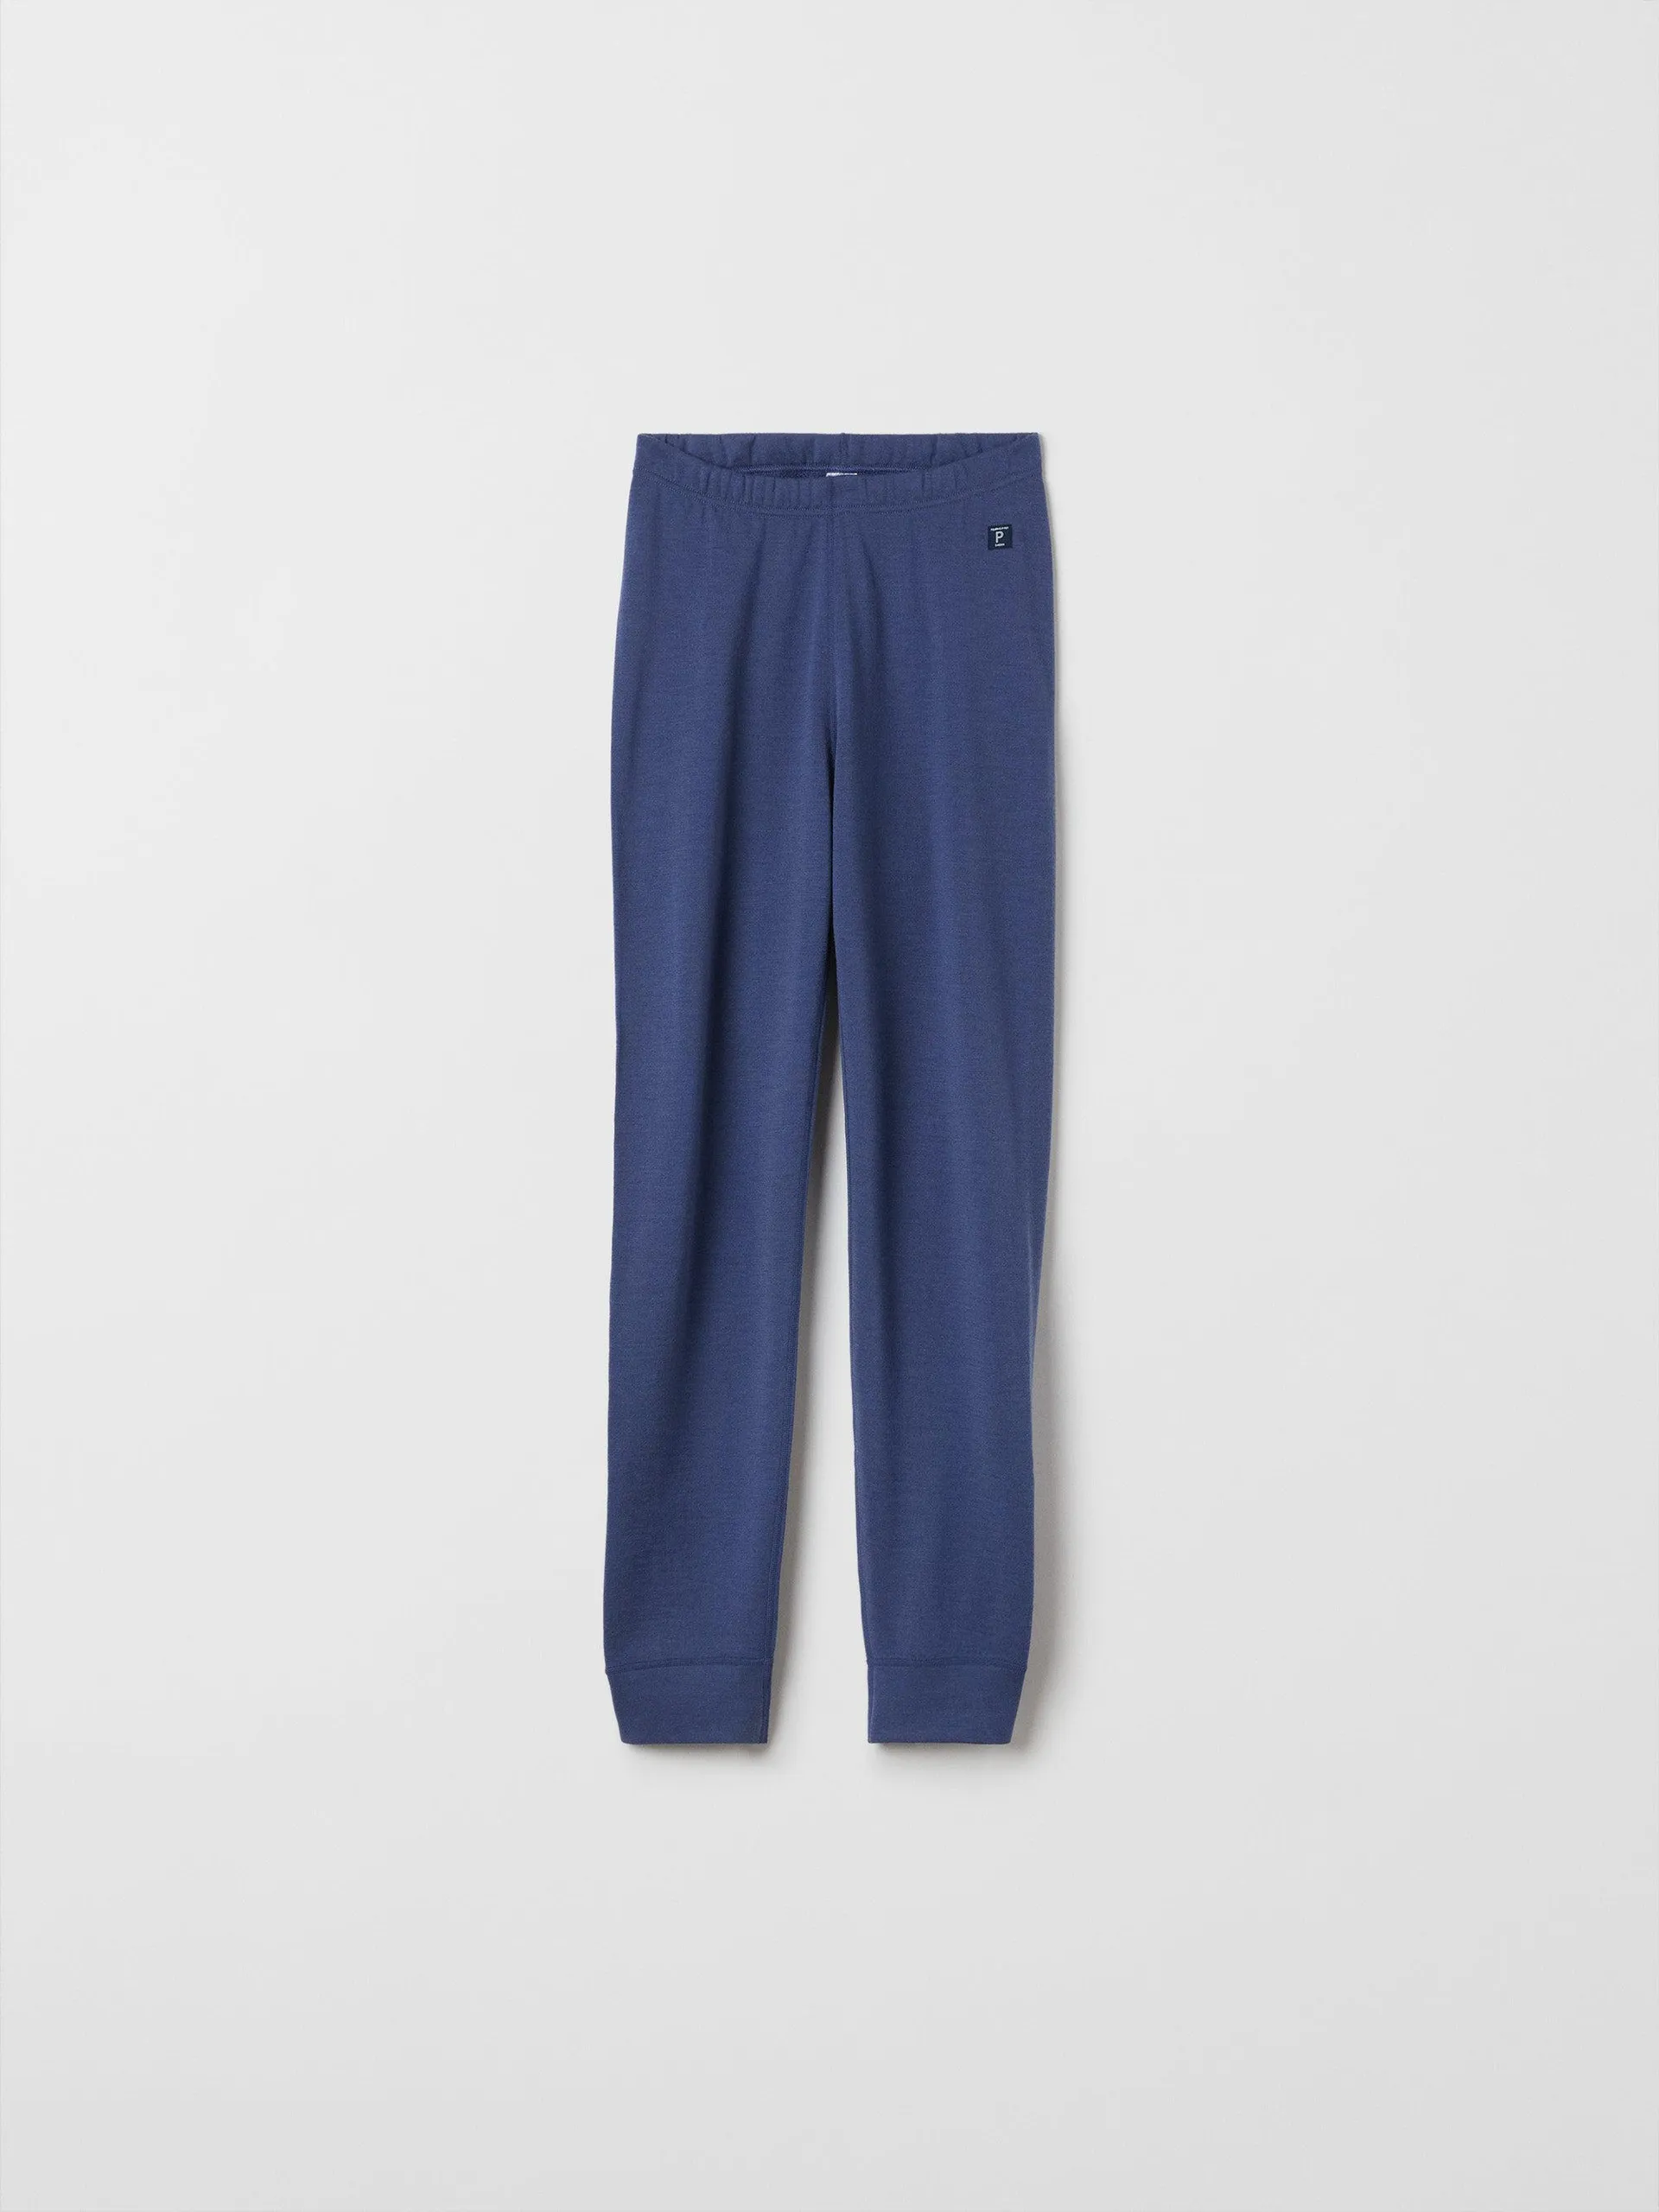 Adult Wool Terry Long Johns